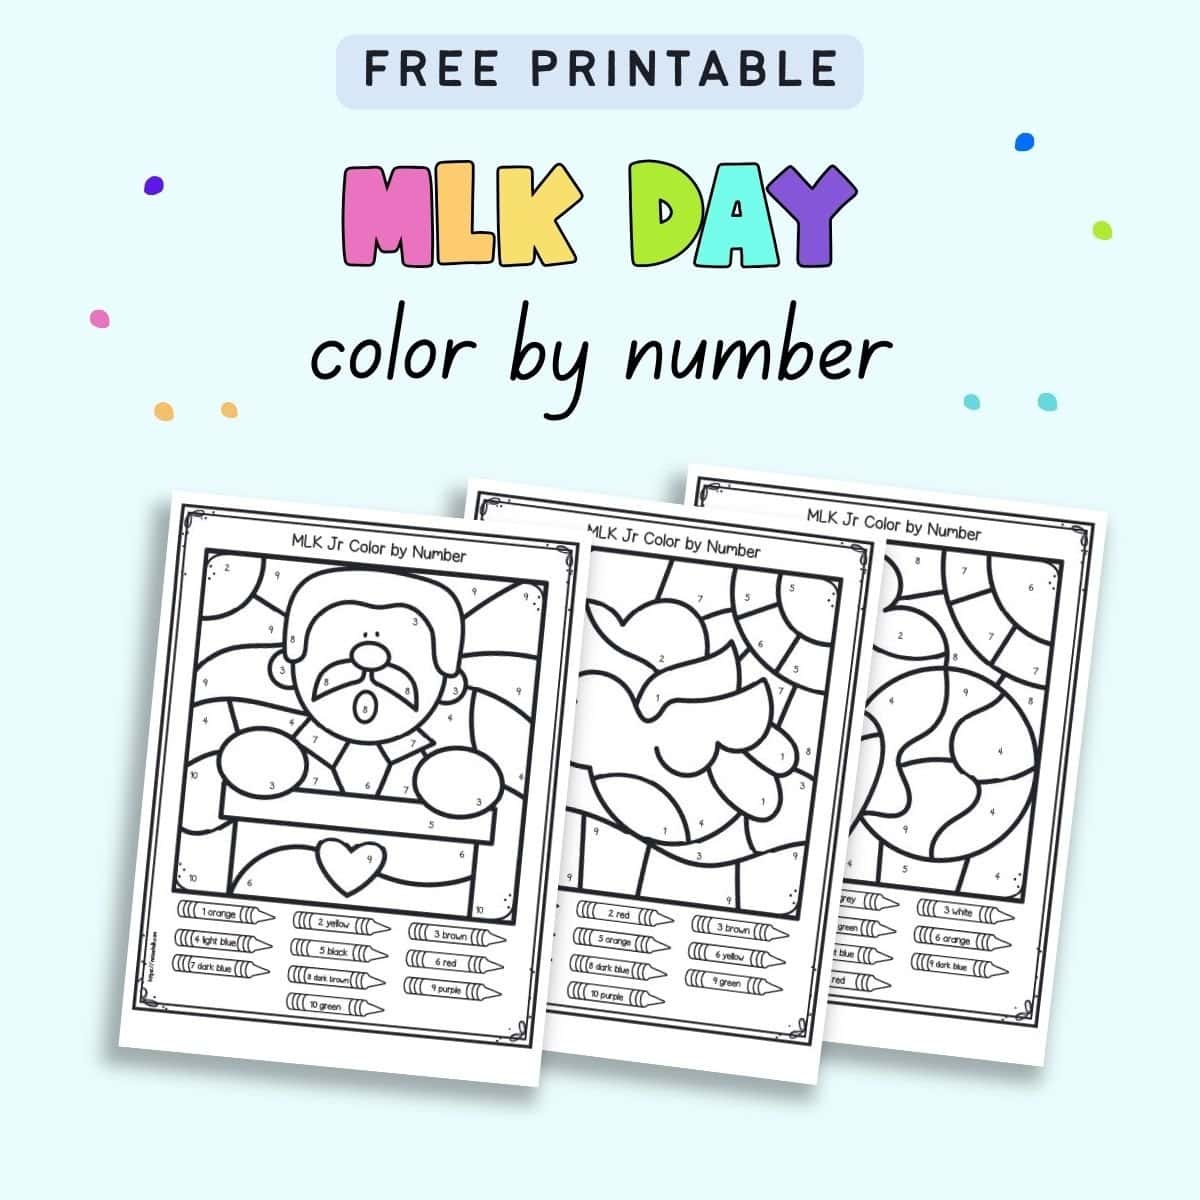 Text "Free printable MLK Day color by number" with a preview of three pages - one with MLK Jr, one with a dove, and another with the earth